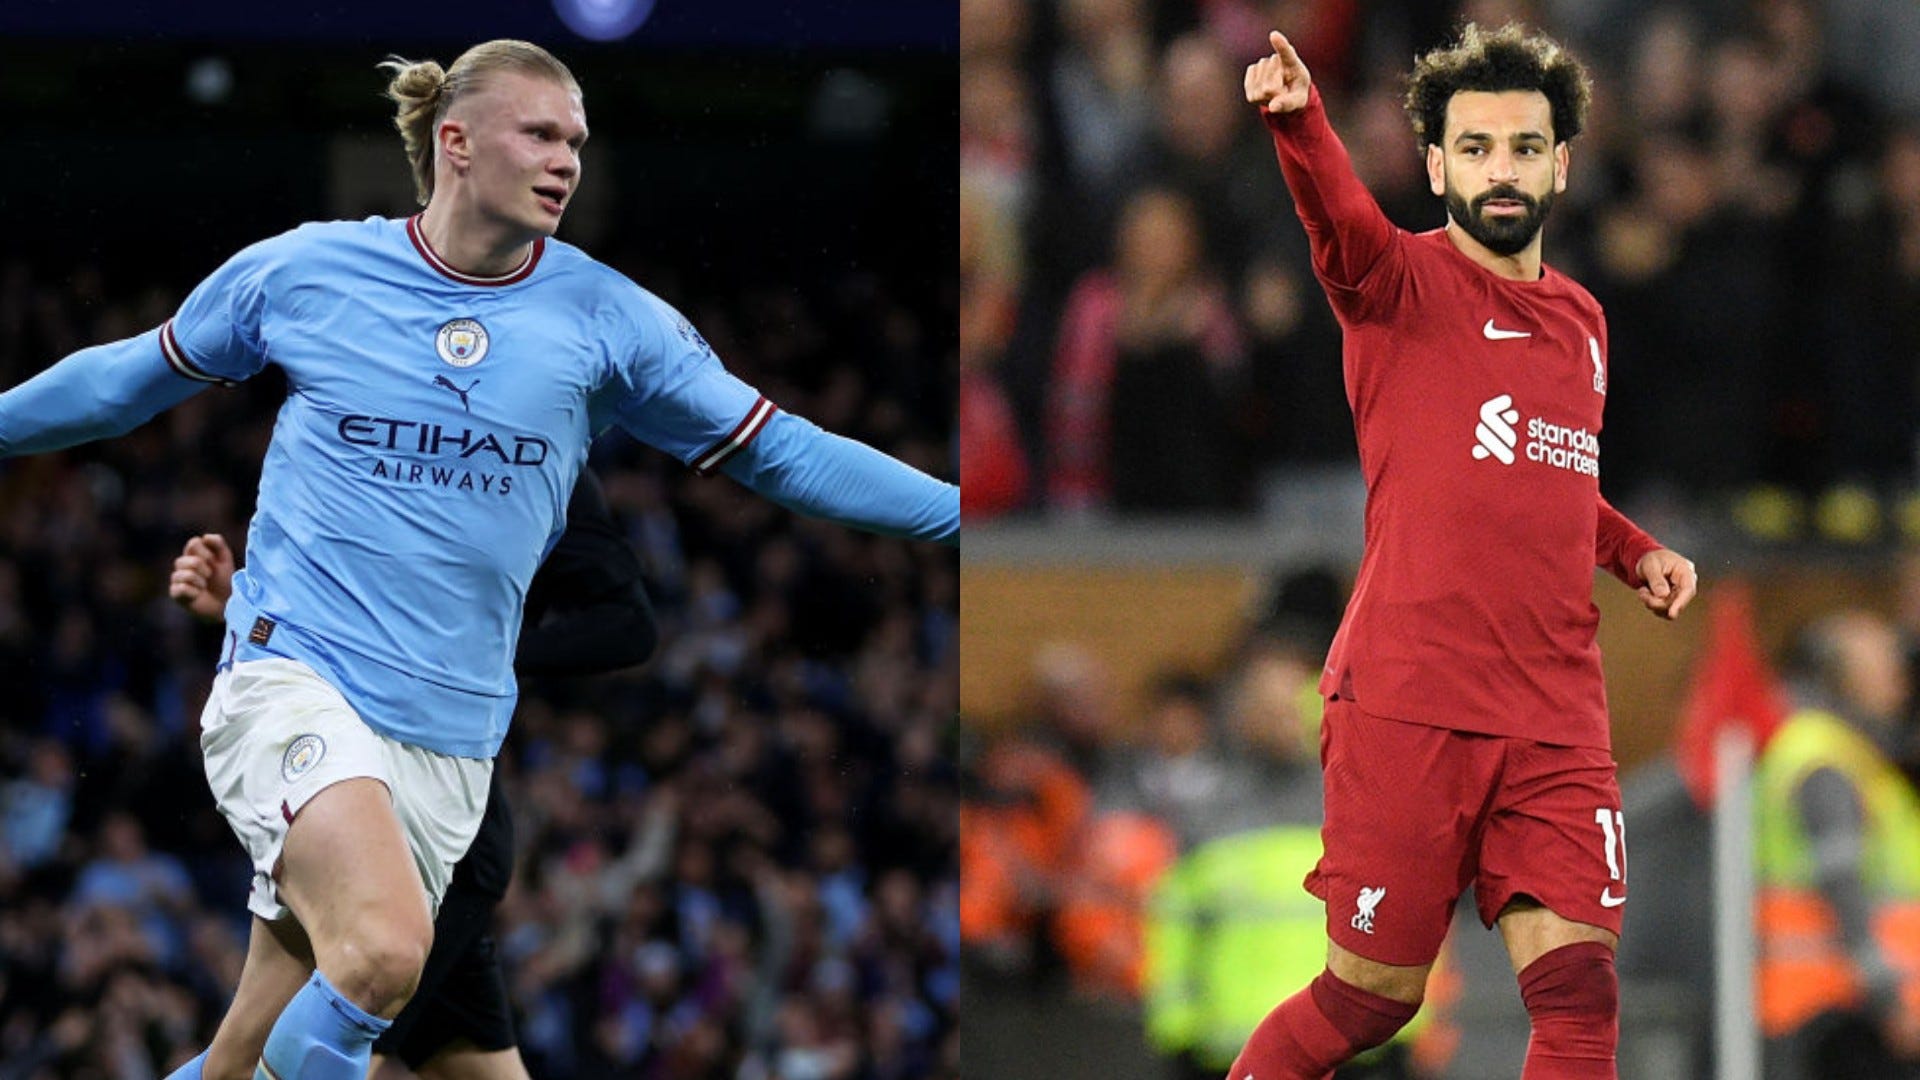 Manchester City vs Liverpool match preview: Team news, head-to